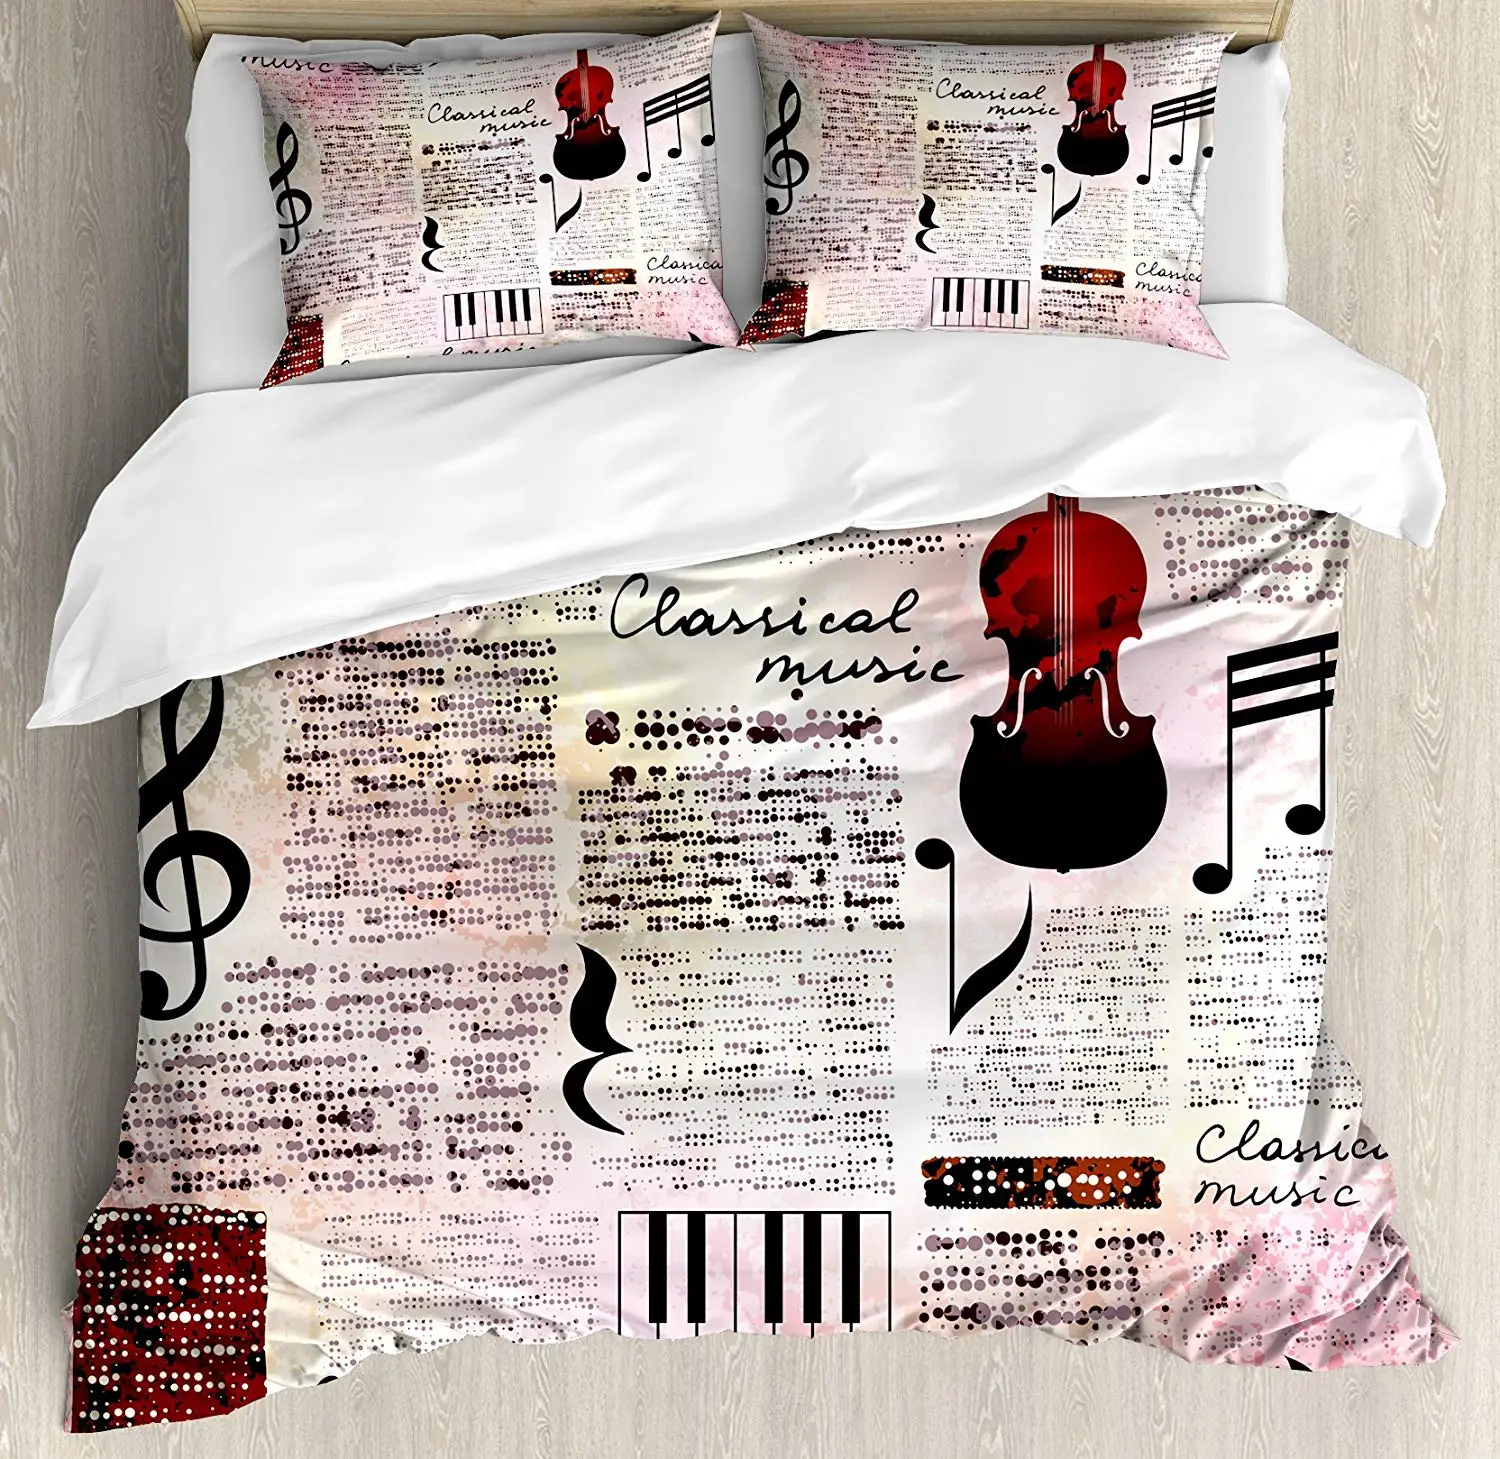 

Old Newspaper Decor Duvet Cover Set Queen Size Classical Music Theme Piano Violin Notes Symbols 4 Piece Bedding Set